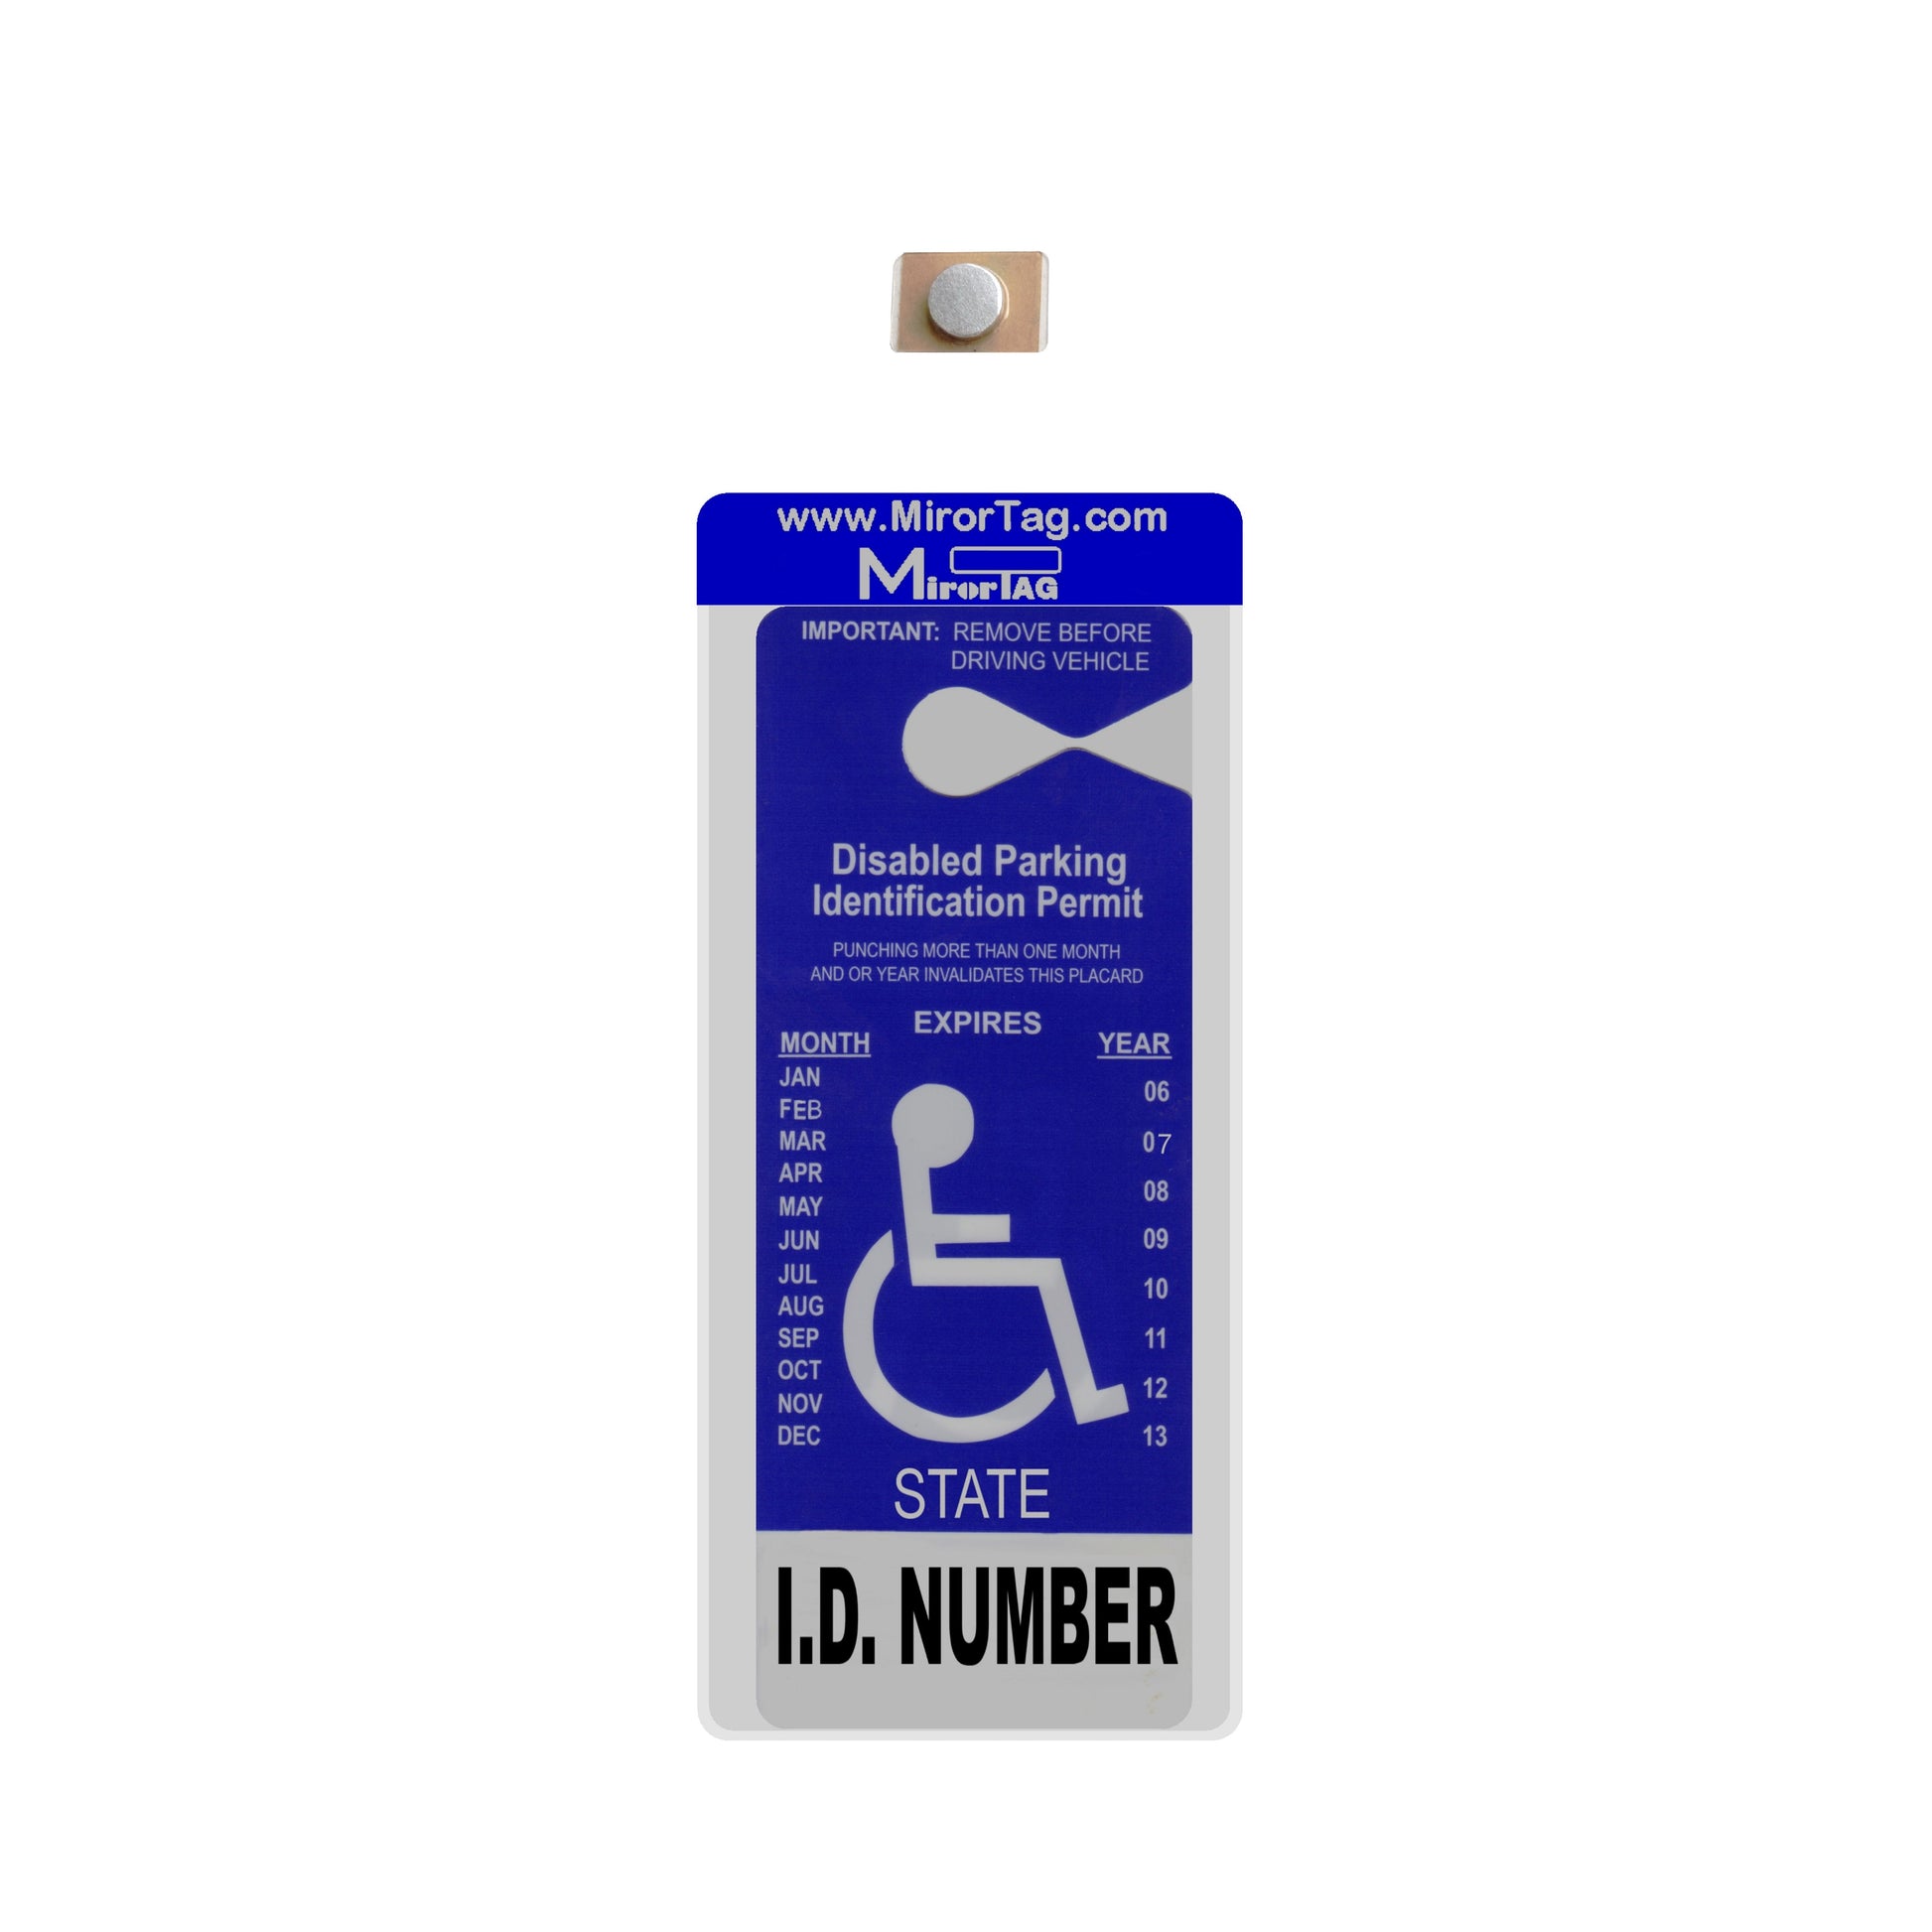 Handicap placard sleeve holder and protector. Peel and stick magnet to rearview mirror, and magnetically attach and detach permit